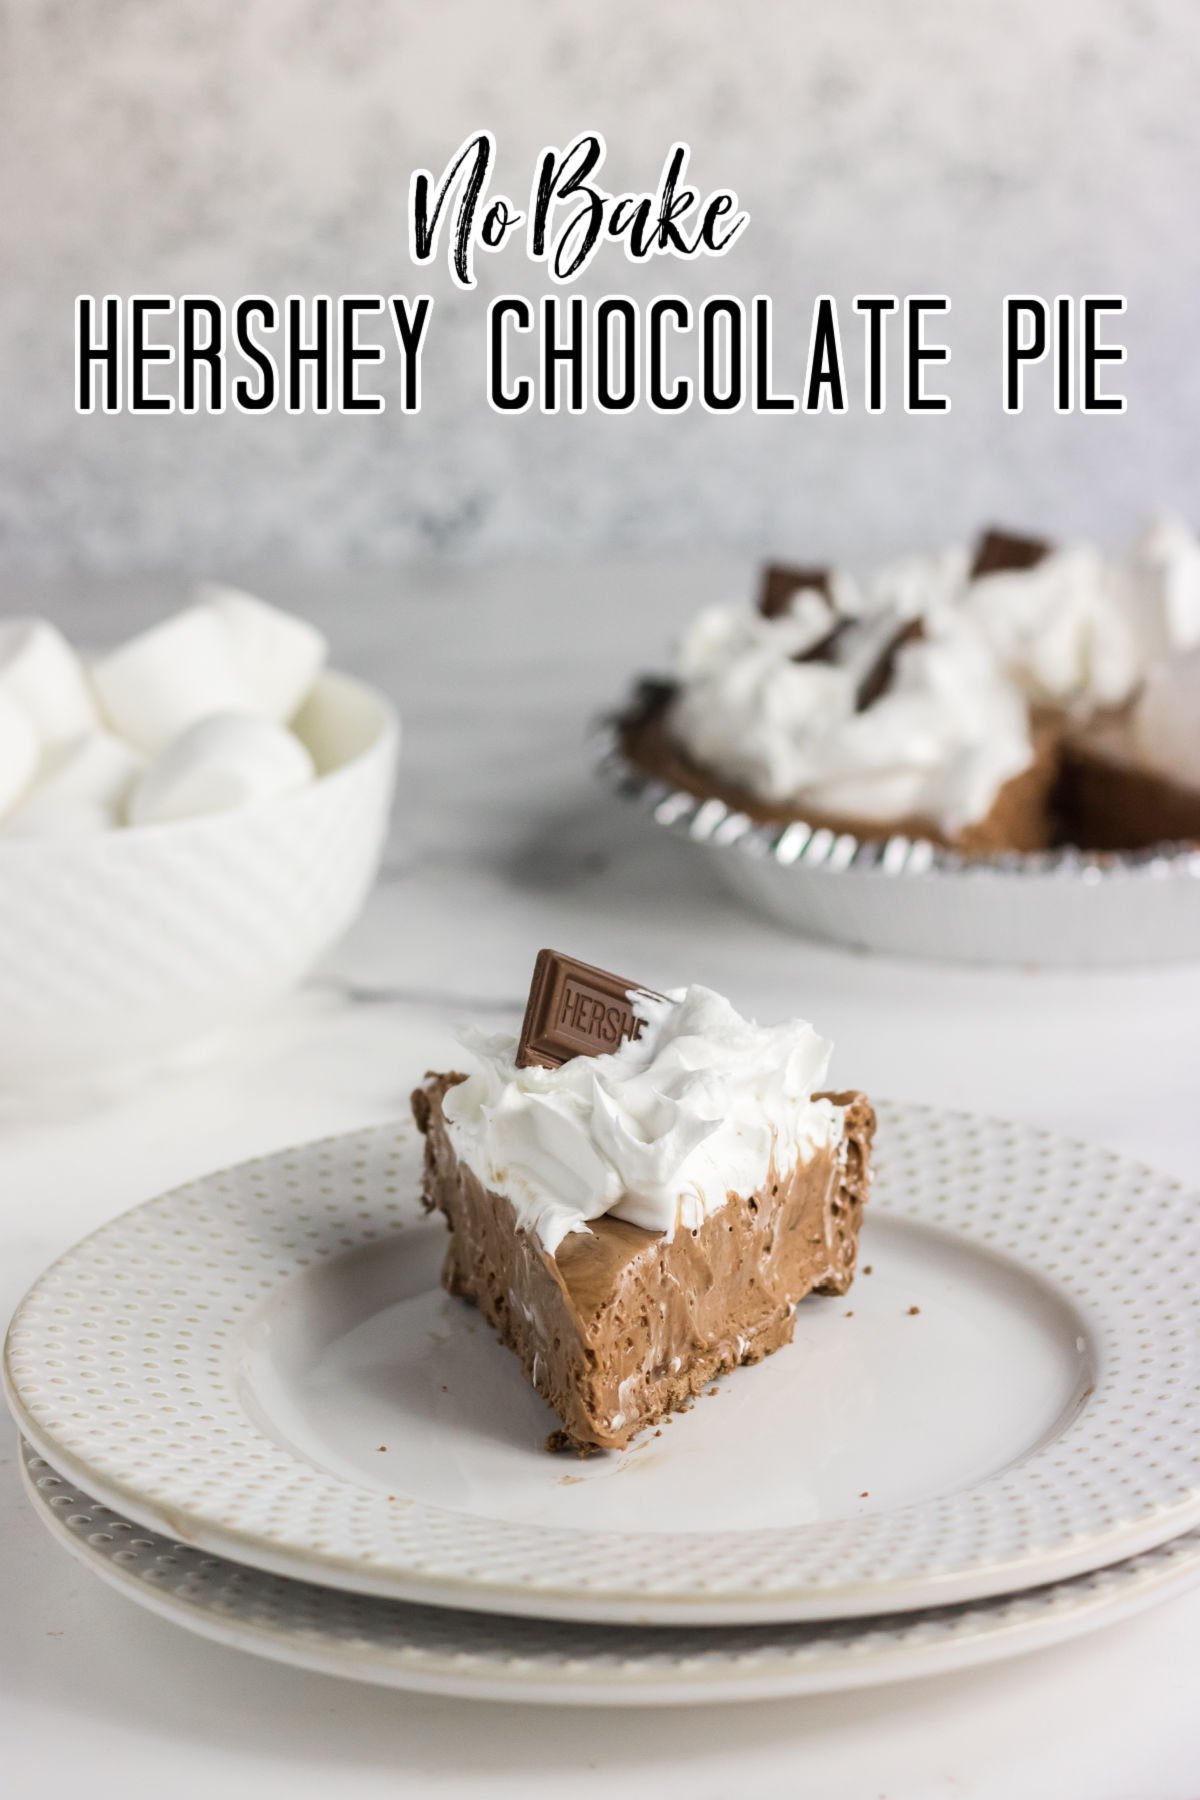 A slice of chocolate pie with a title text overlay.